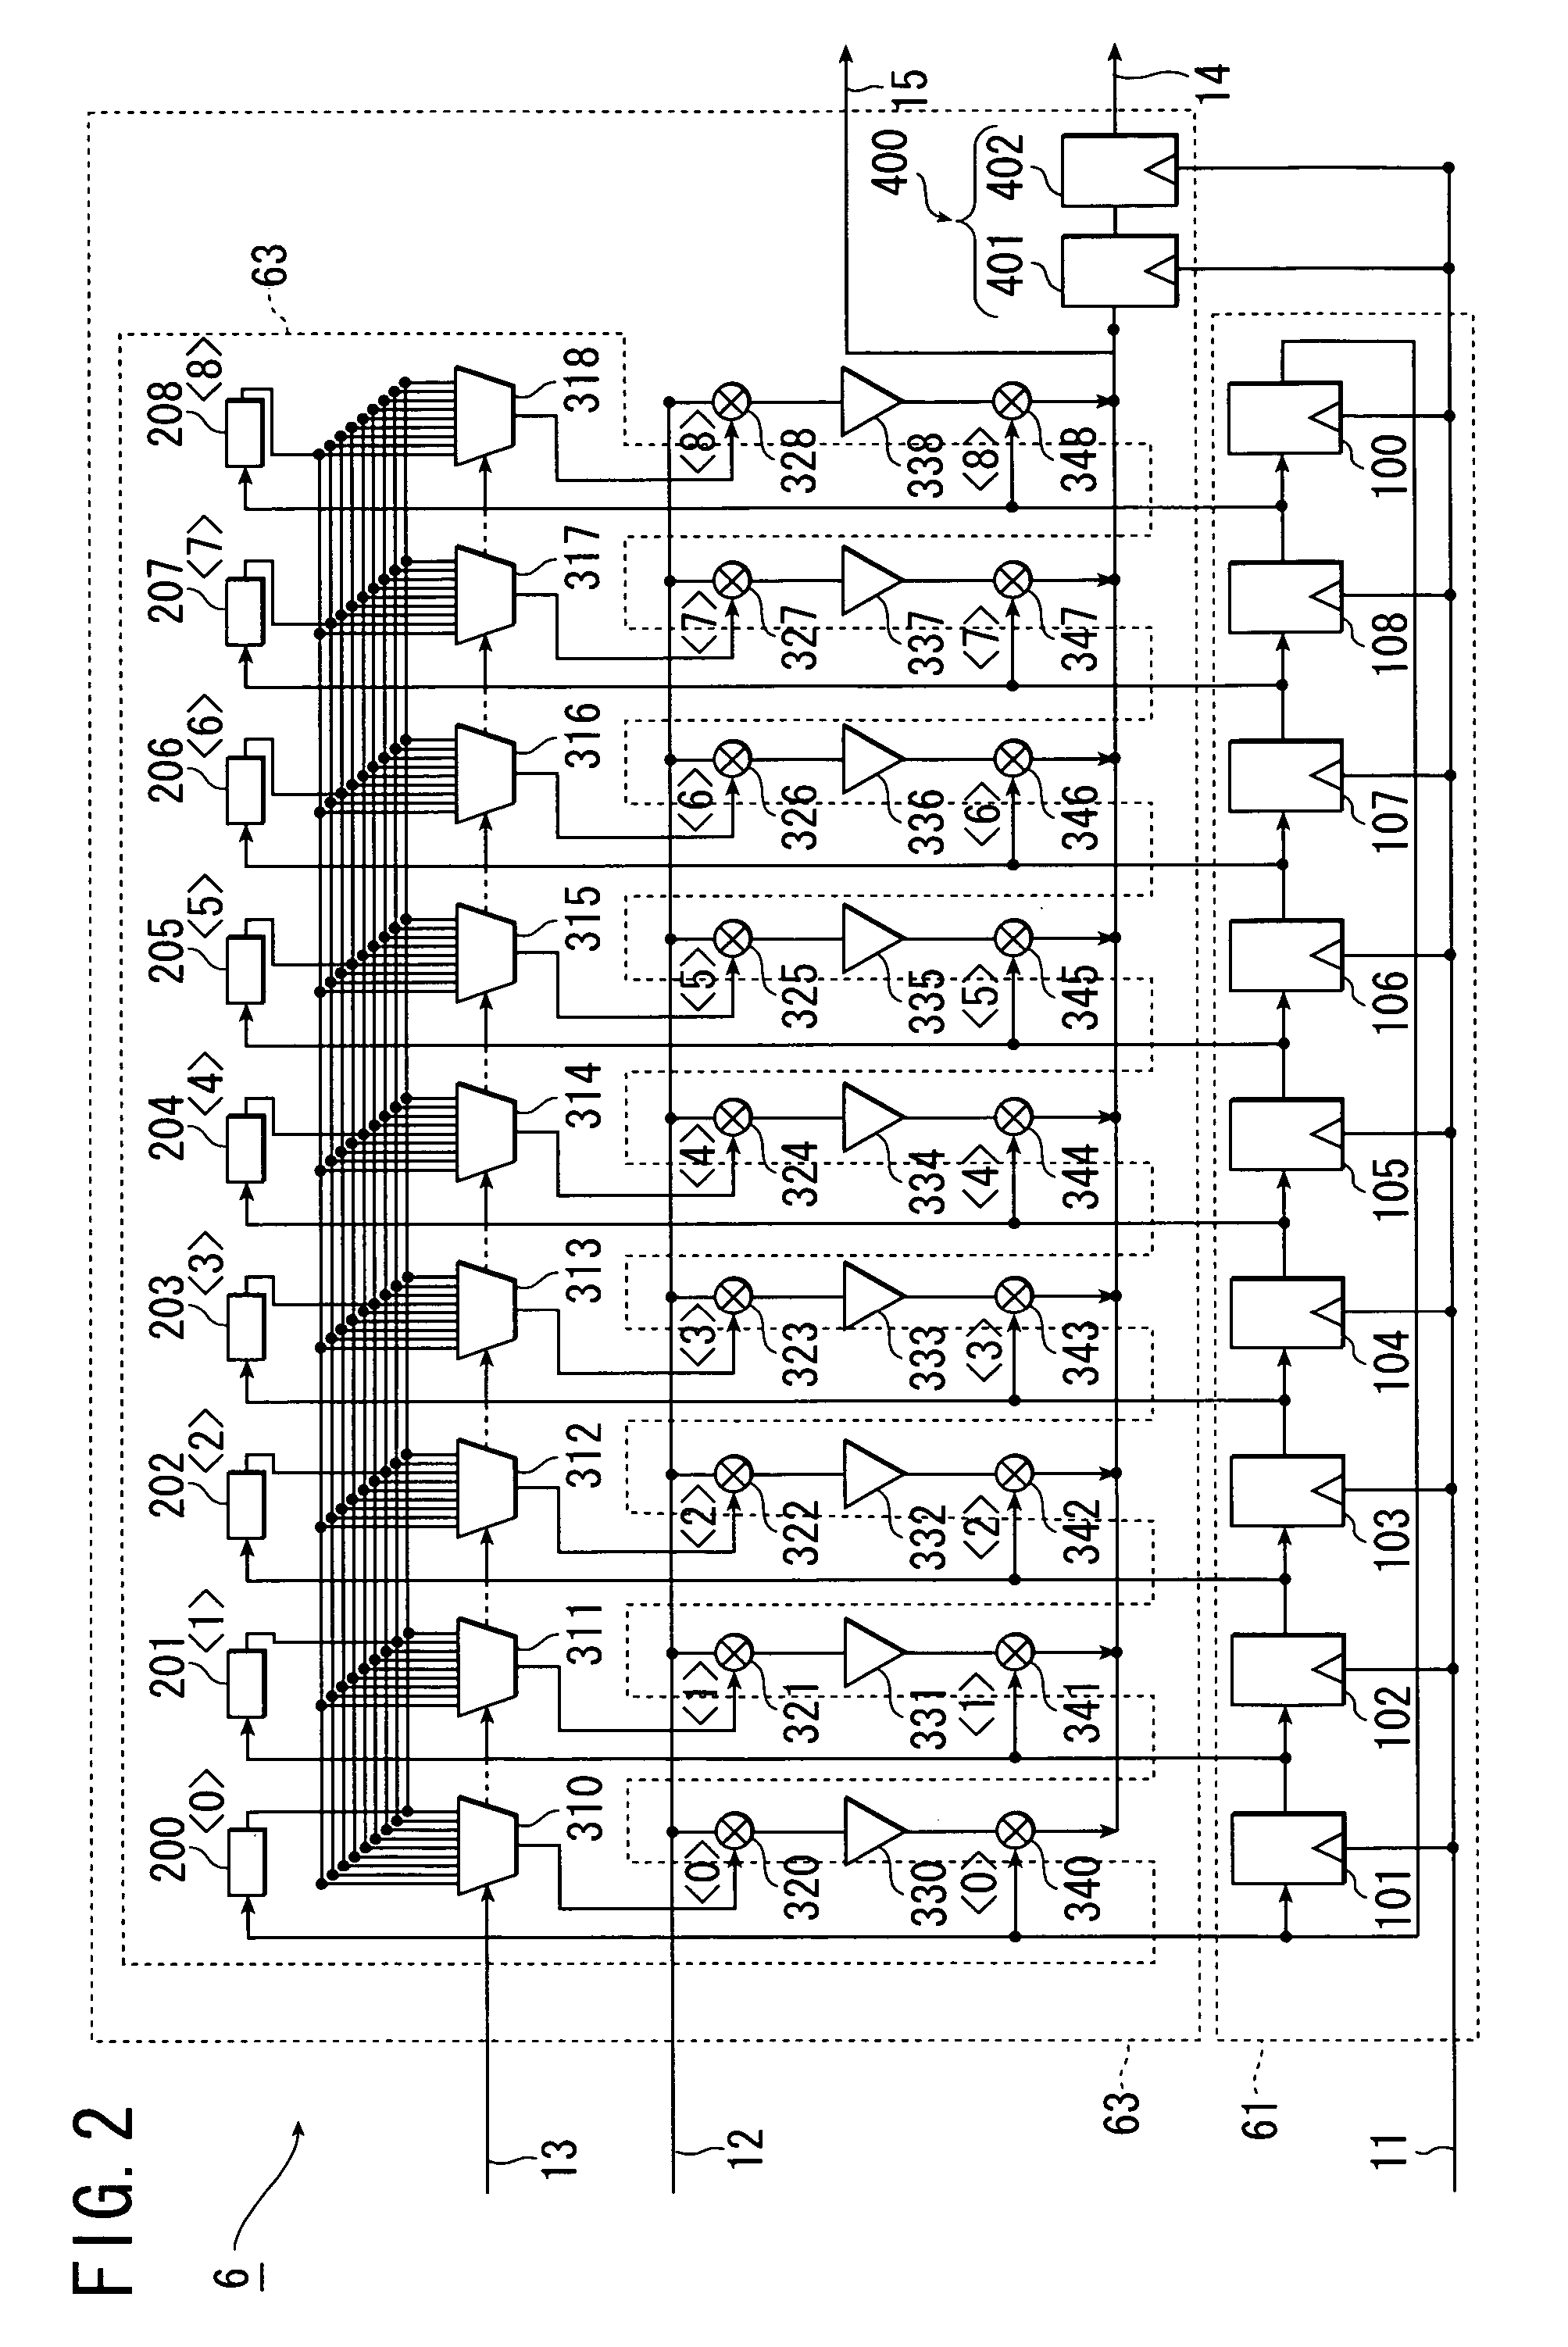 Semiconductor device with latency counter